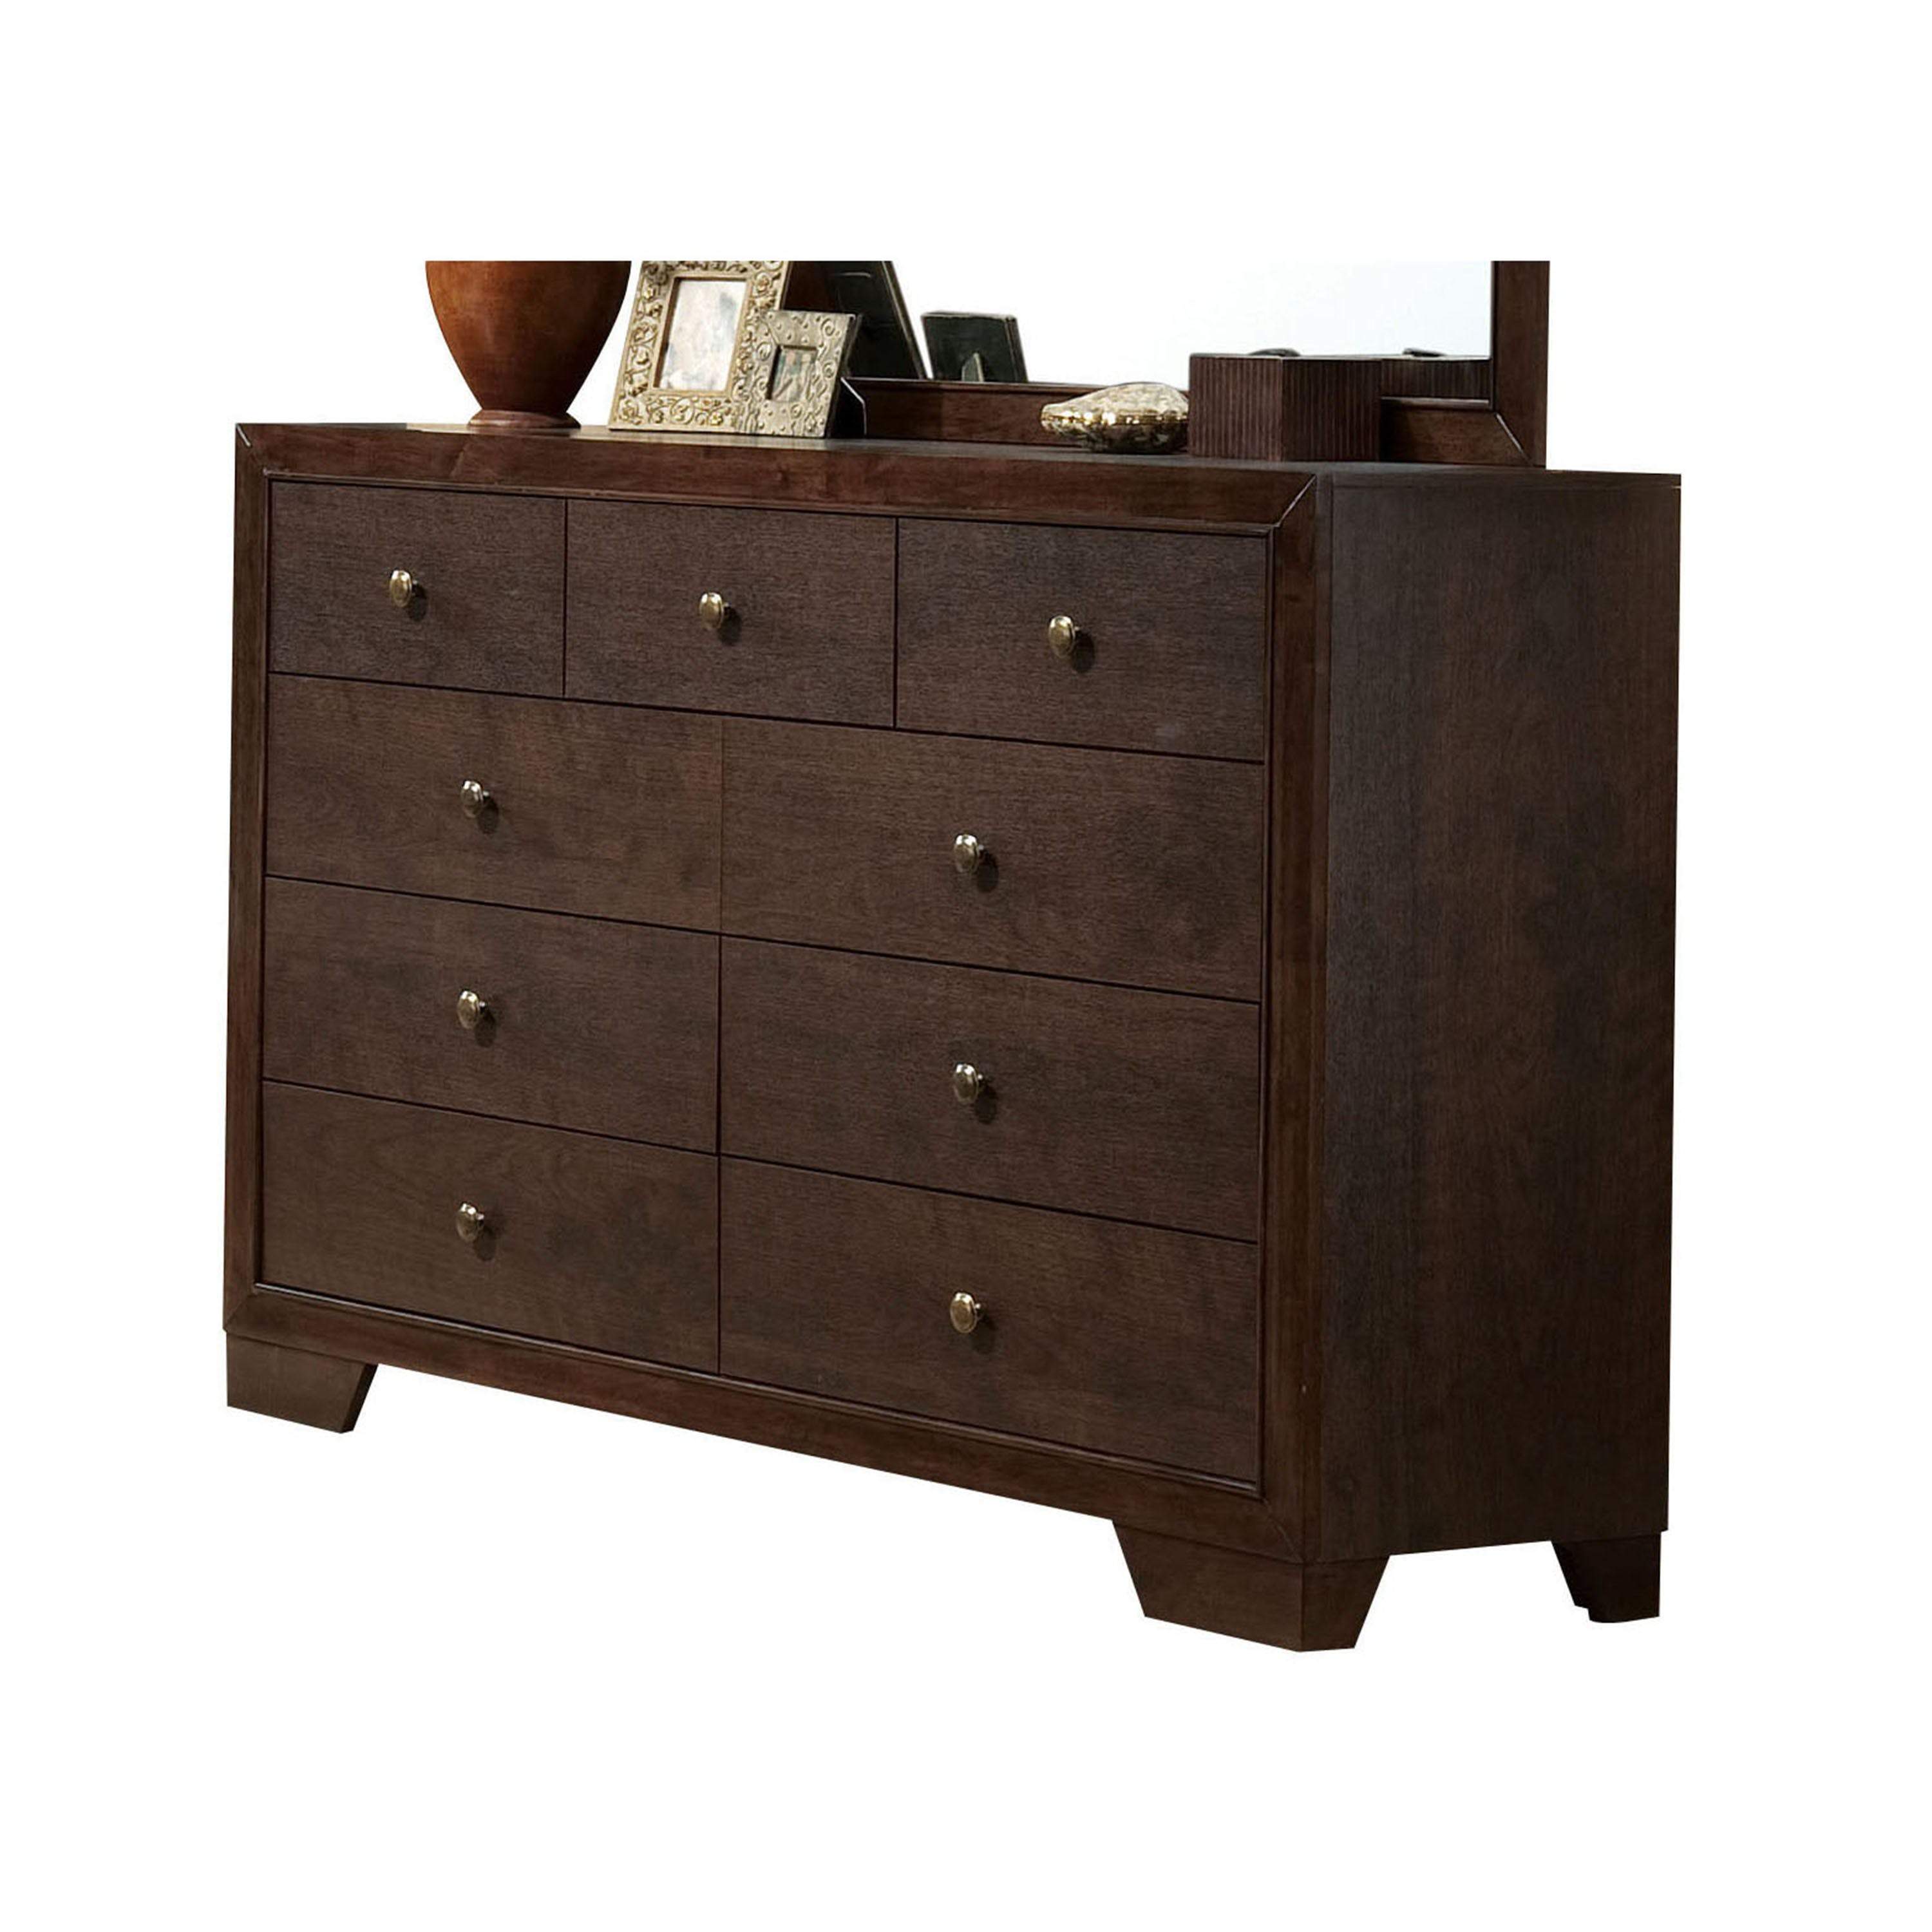 Contemporary Style Wooden Dresser With 9 Drawers Espresso Brown